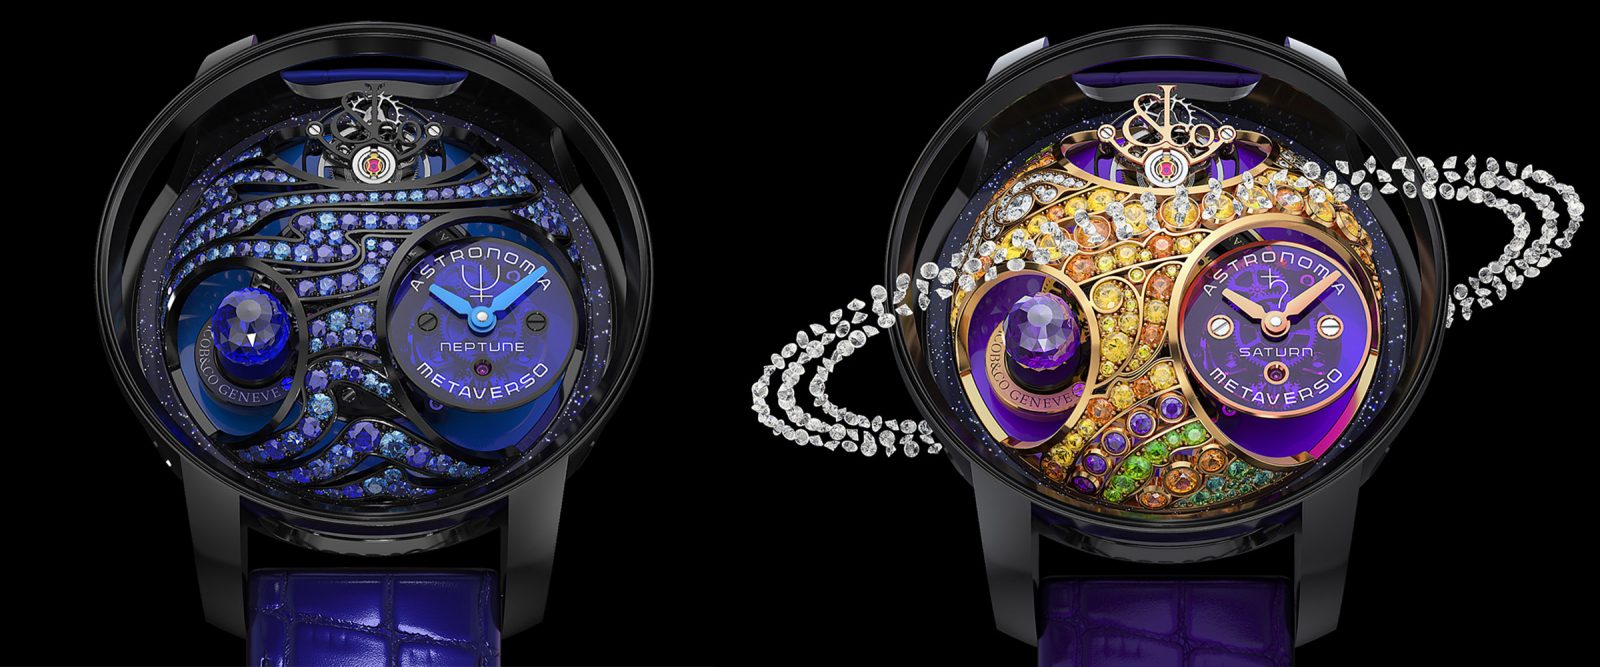 Jacob & Co. Announces First-ever Luxury NFT Collection: Astronomia Metaverso